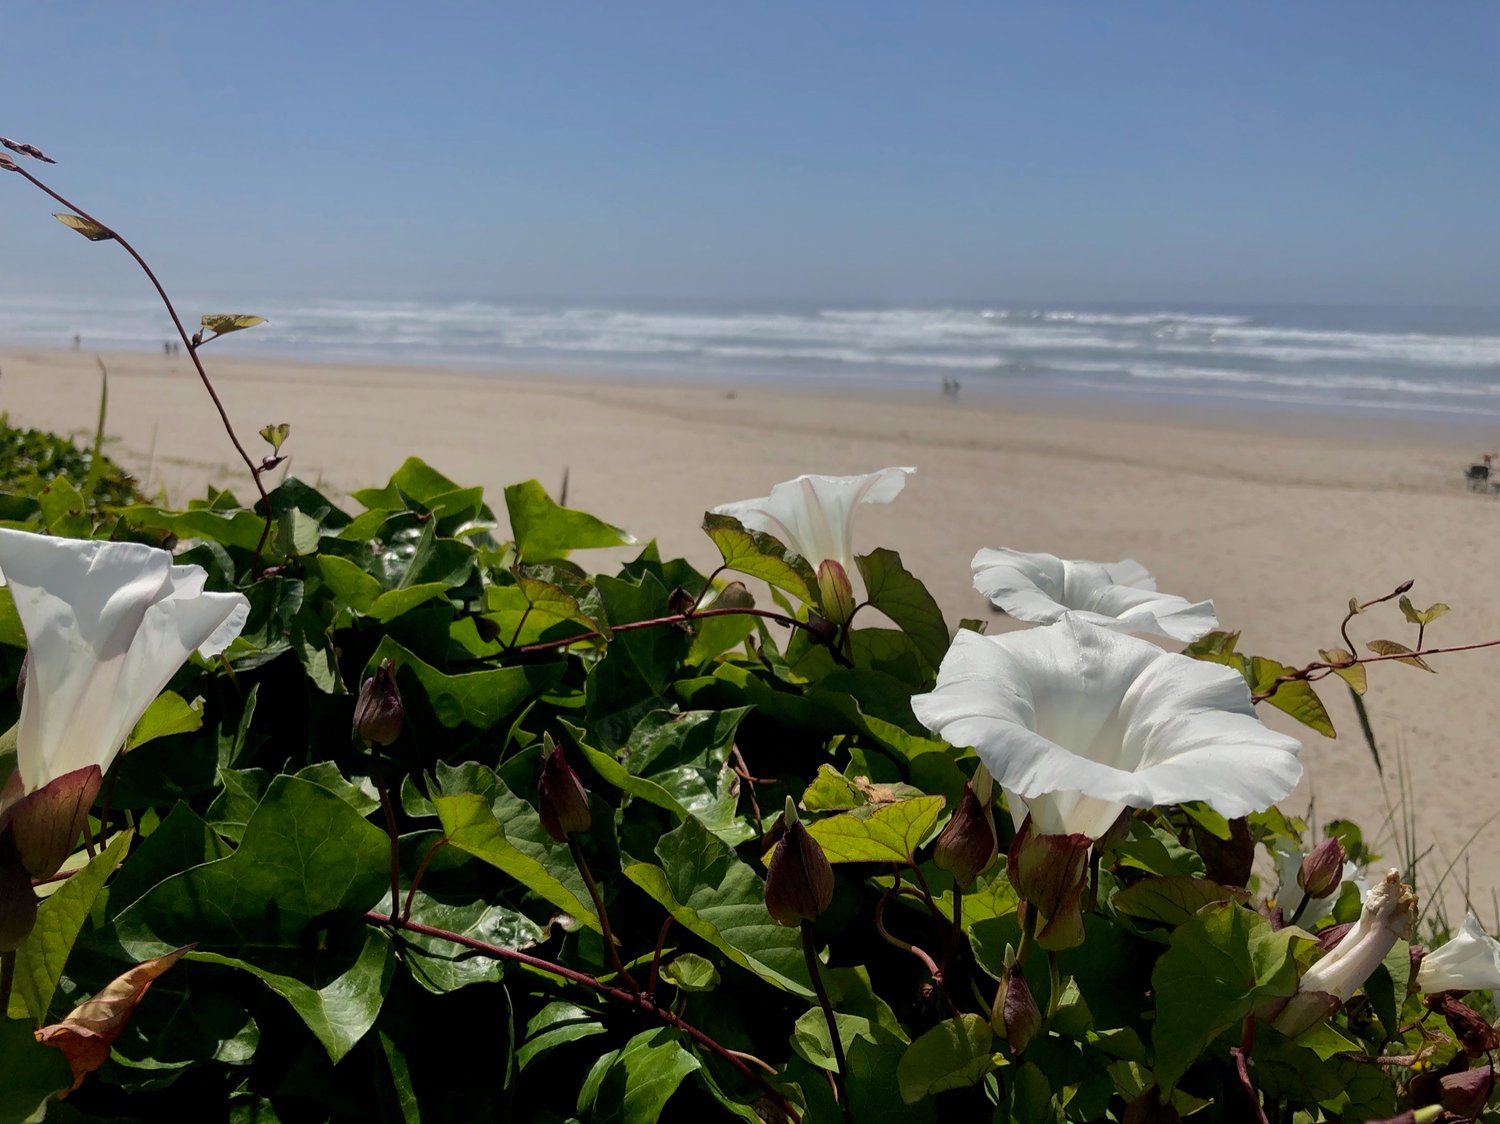 View of a beach overlooking some morning glories in bloom